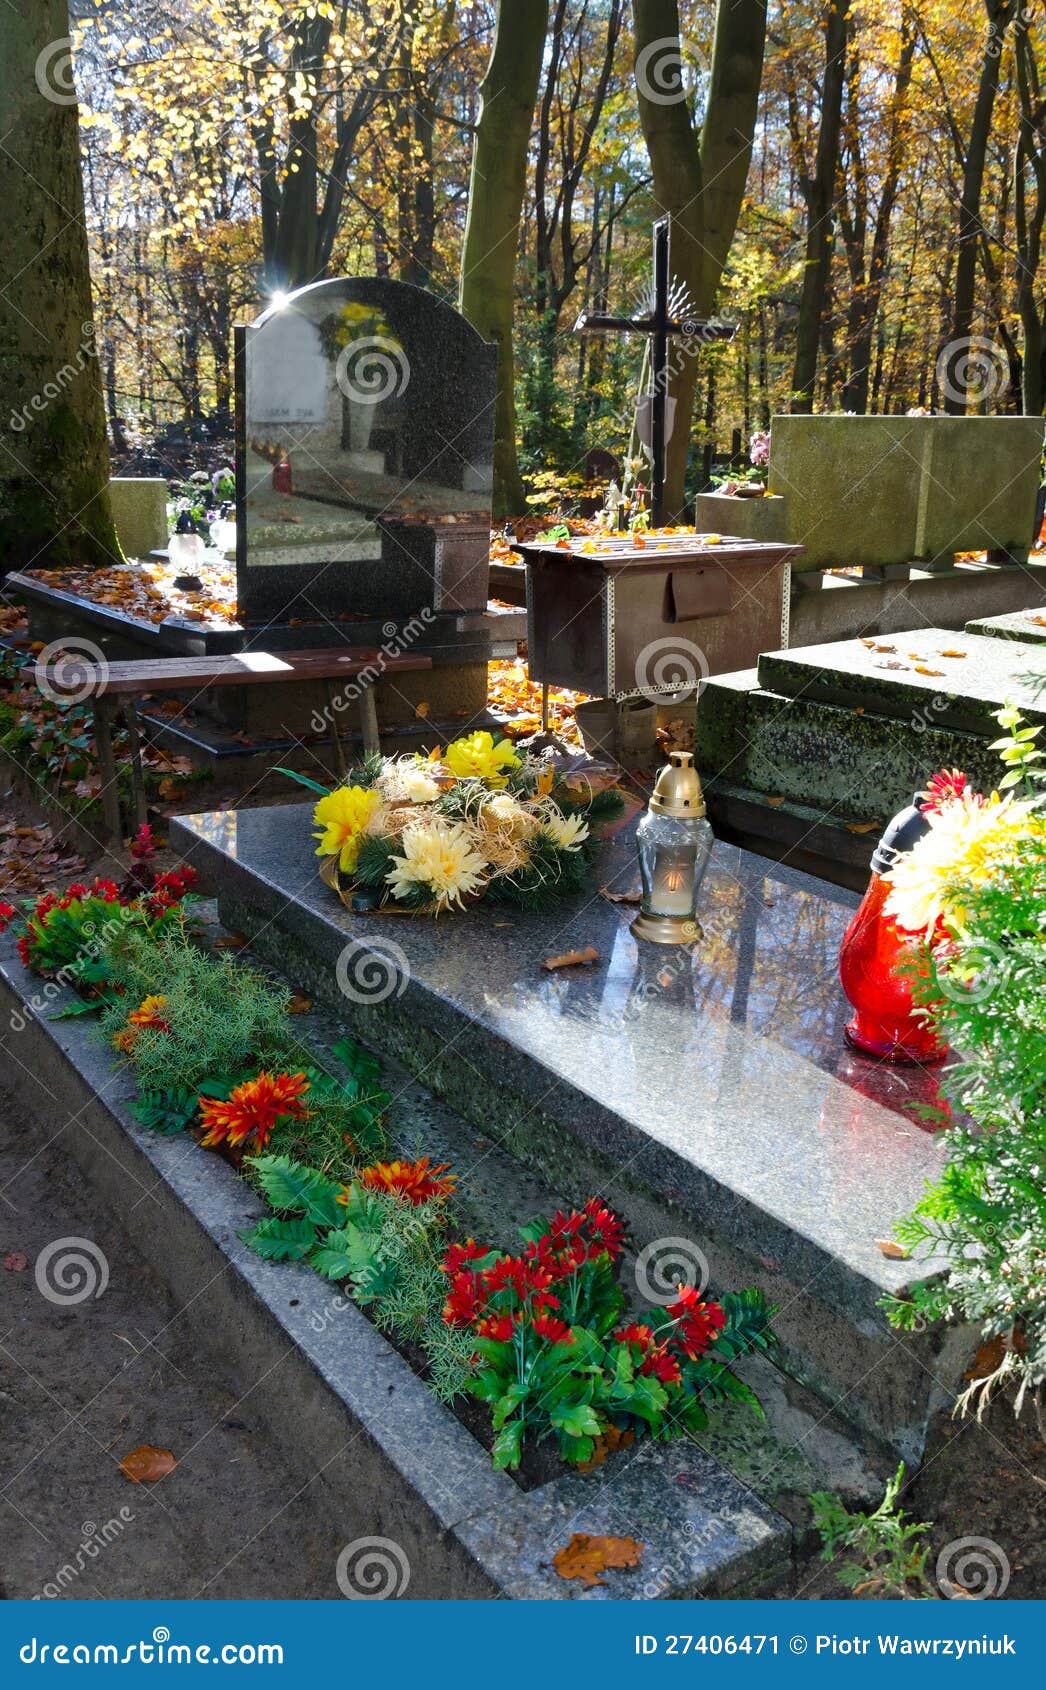 Cemetery decorations stock image. Image of memory, poland - 27406471